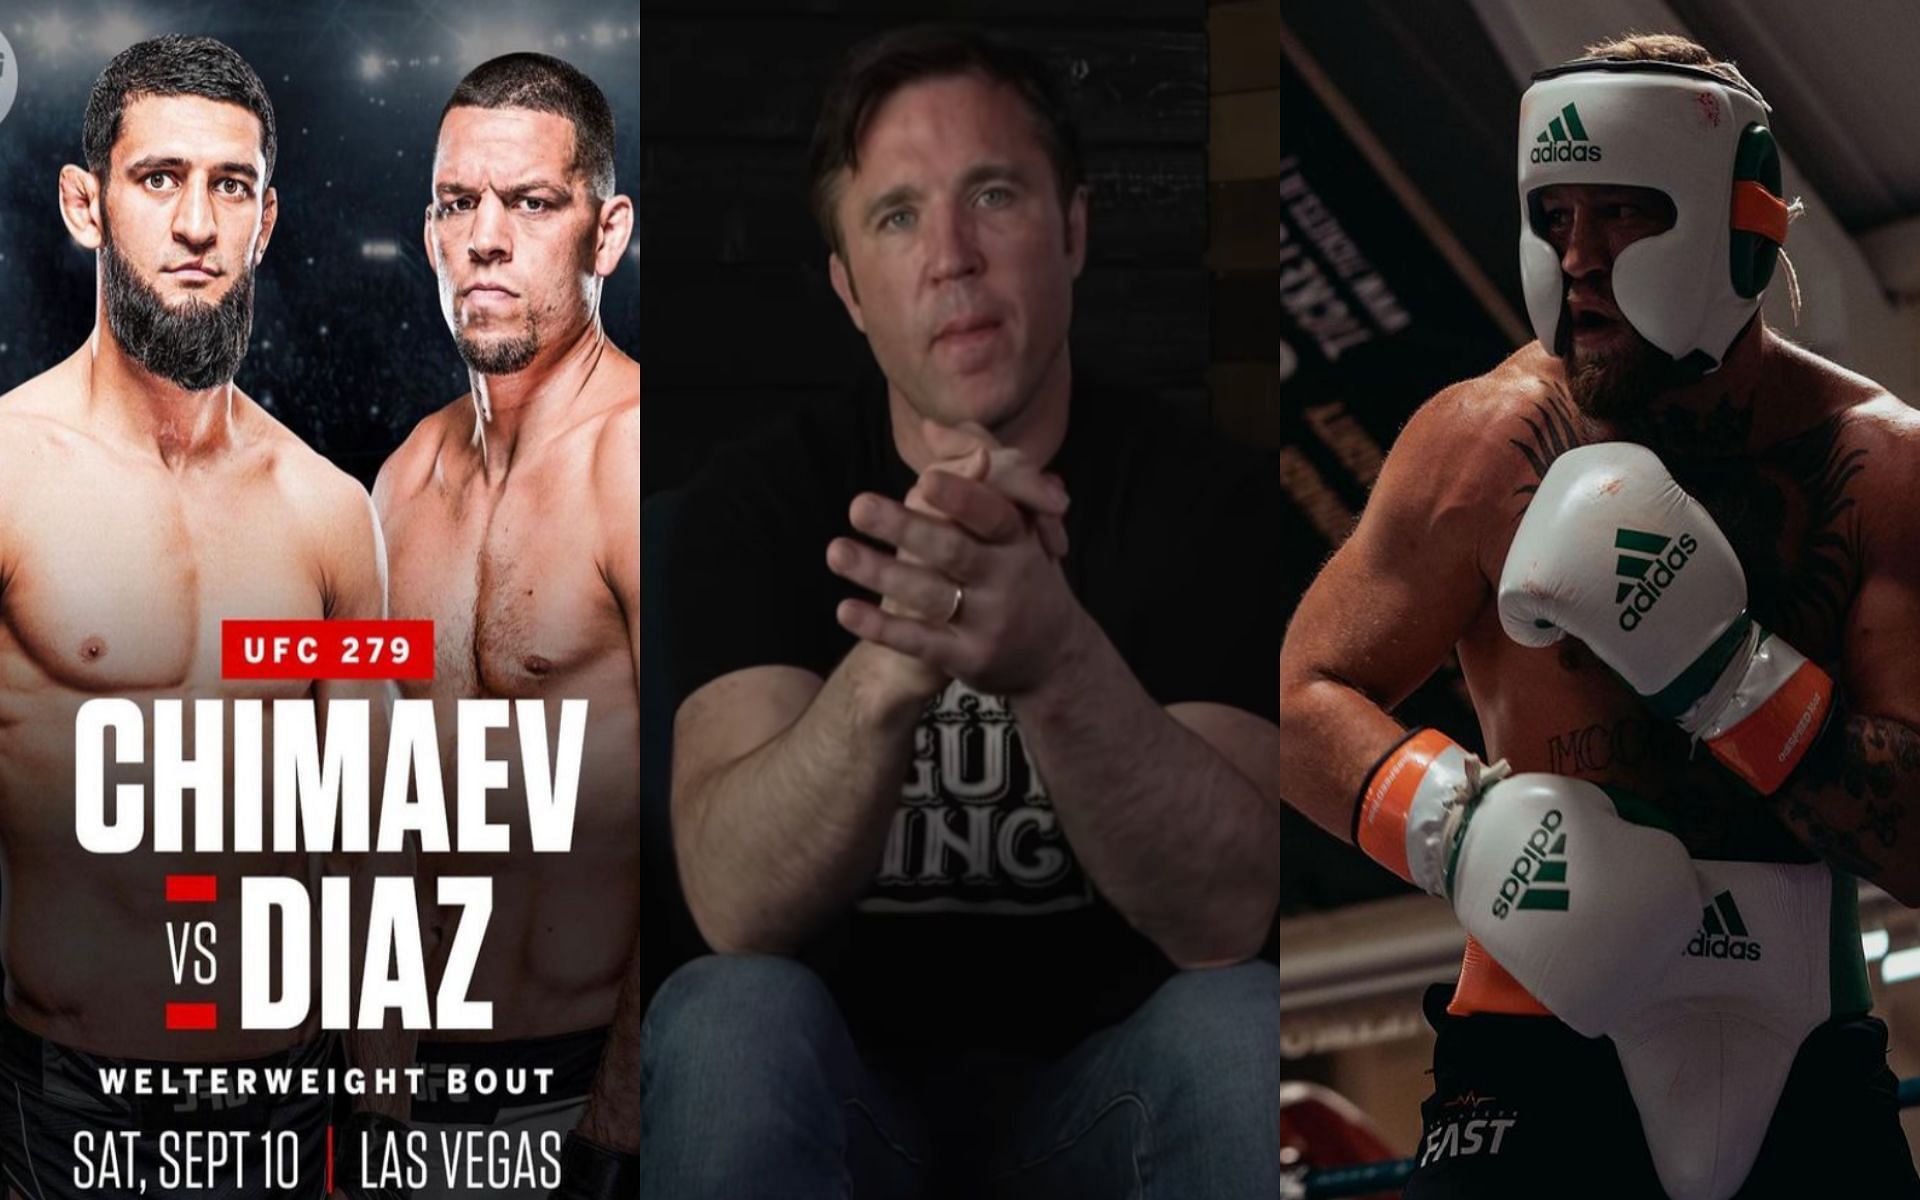 Khamzat Chimaev (far left), Nate Diaz (left), Chael Sonnen (middle), and Conor McGregor (right) [Images courtesy: @khamzat_chimaev, @sonnench, and @thenotoriousmma on Instagram]